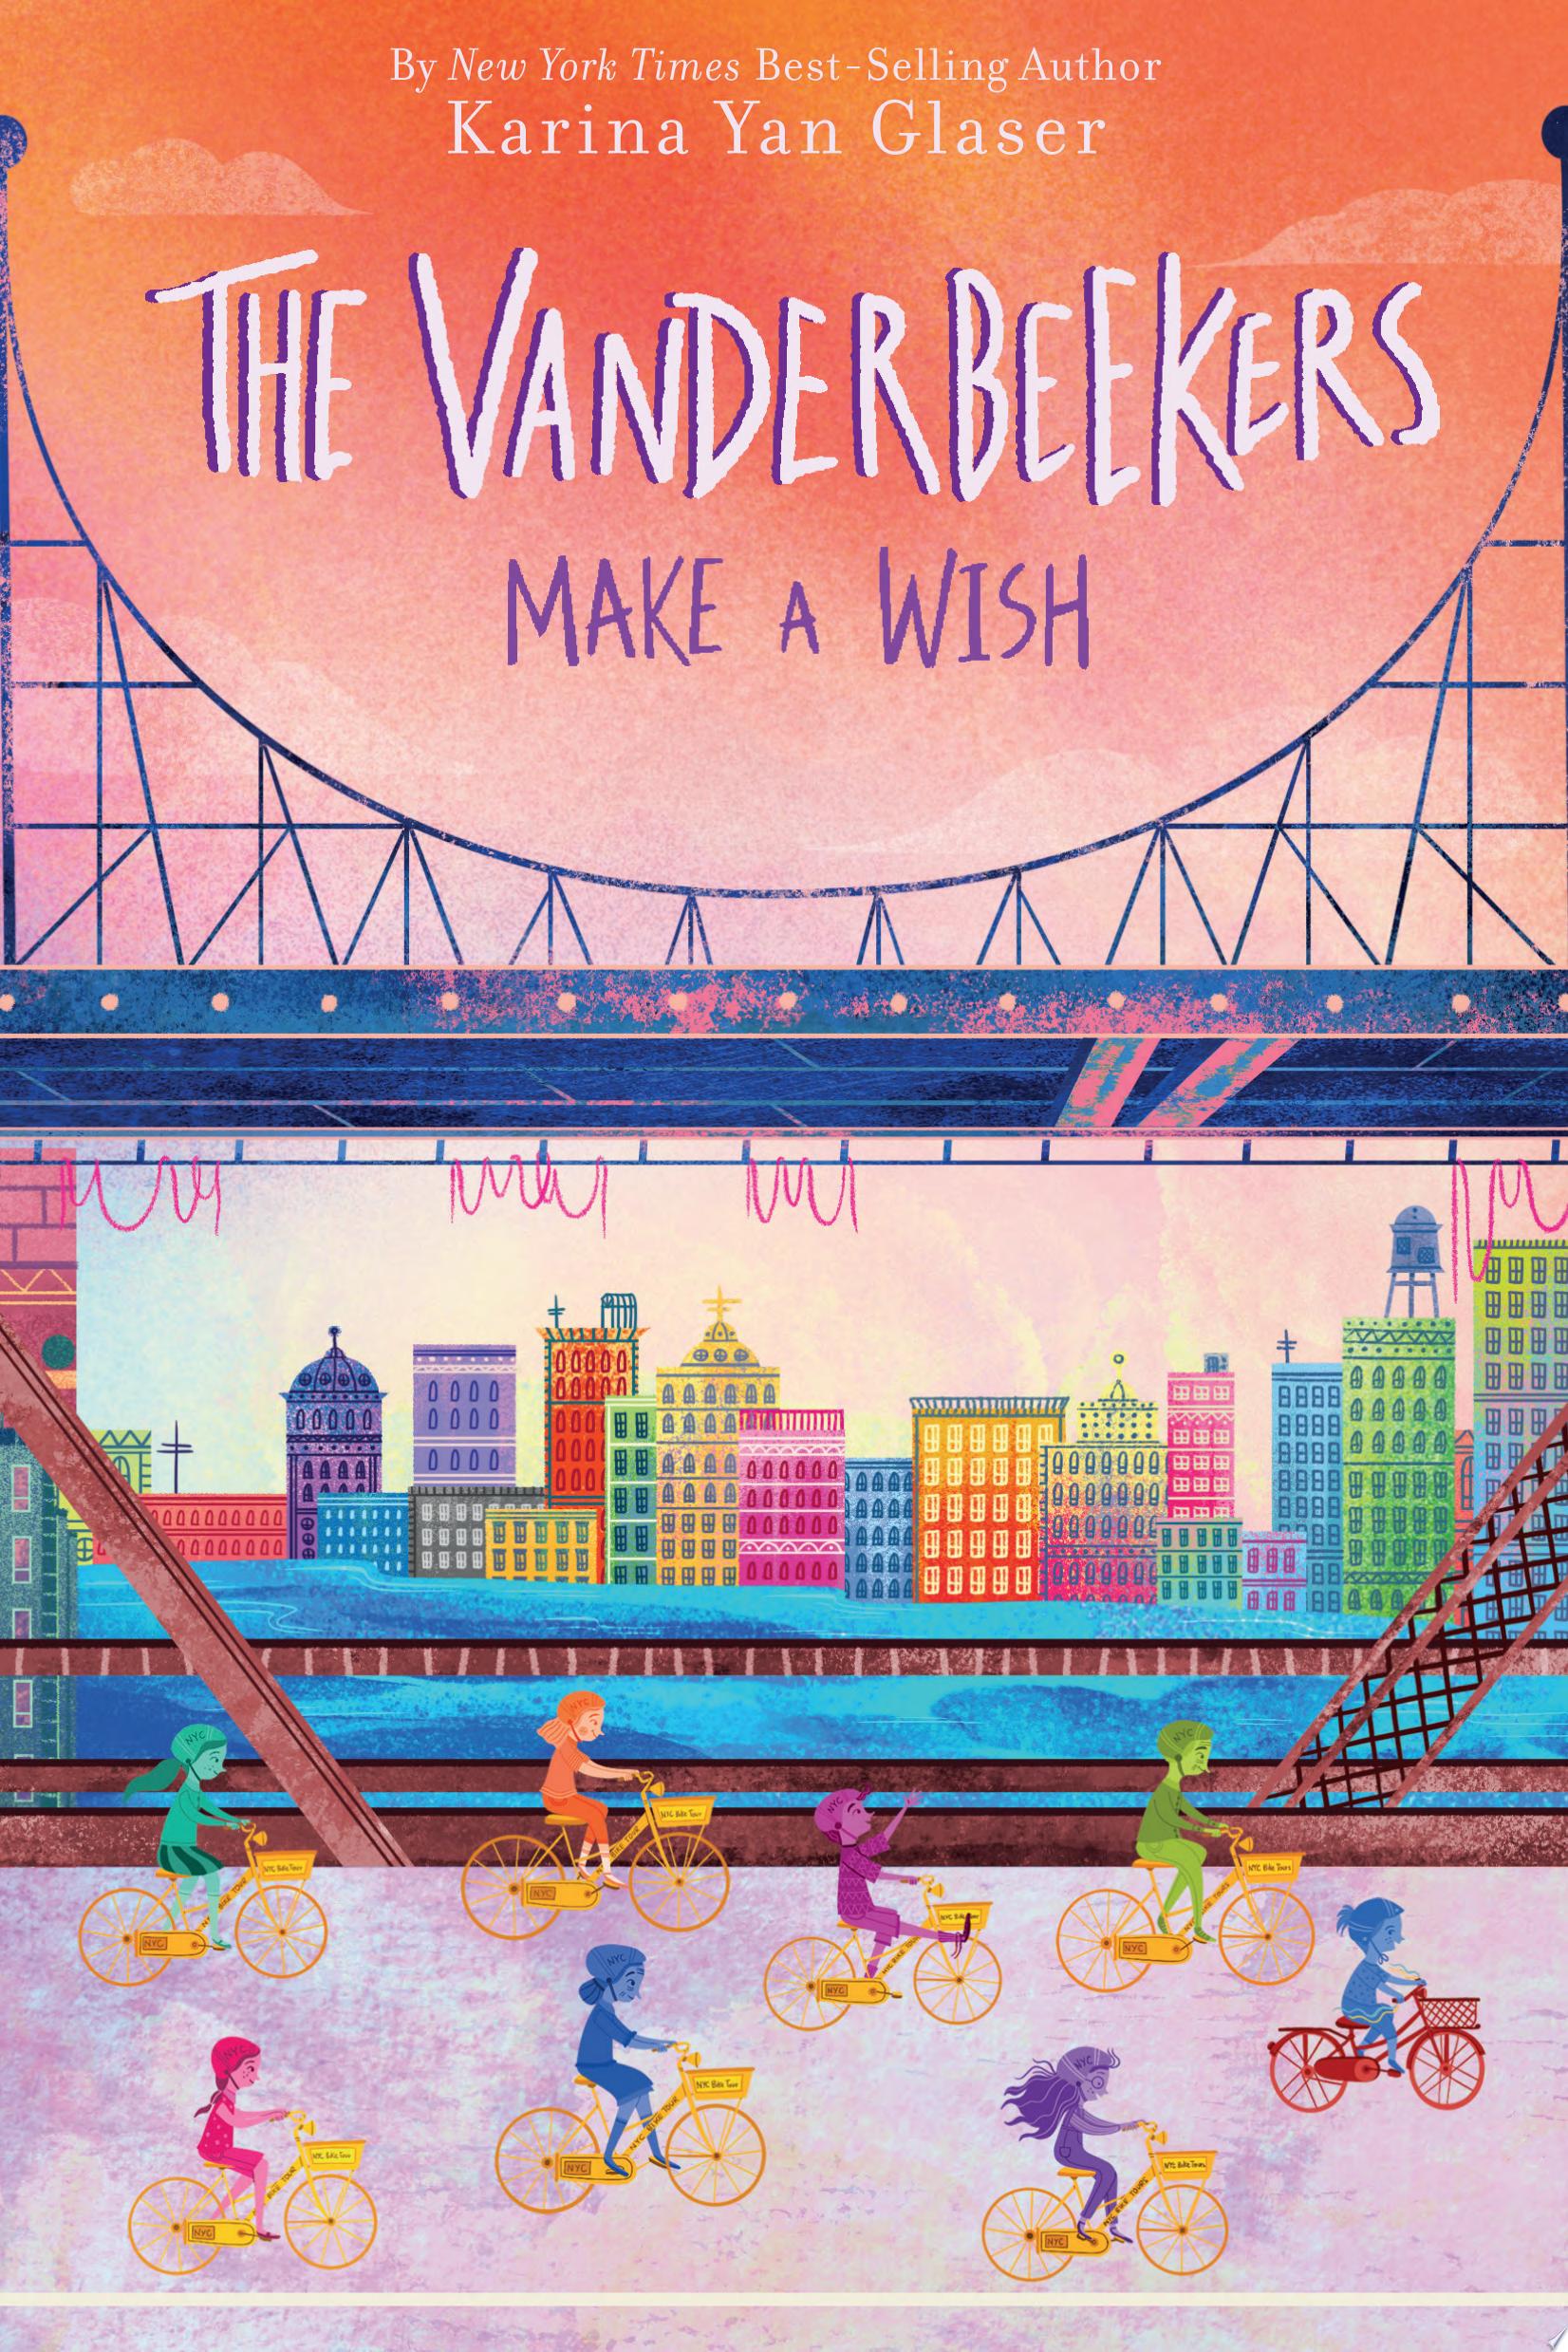 Image for "The Vanderbeekers Make a Wish"